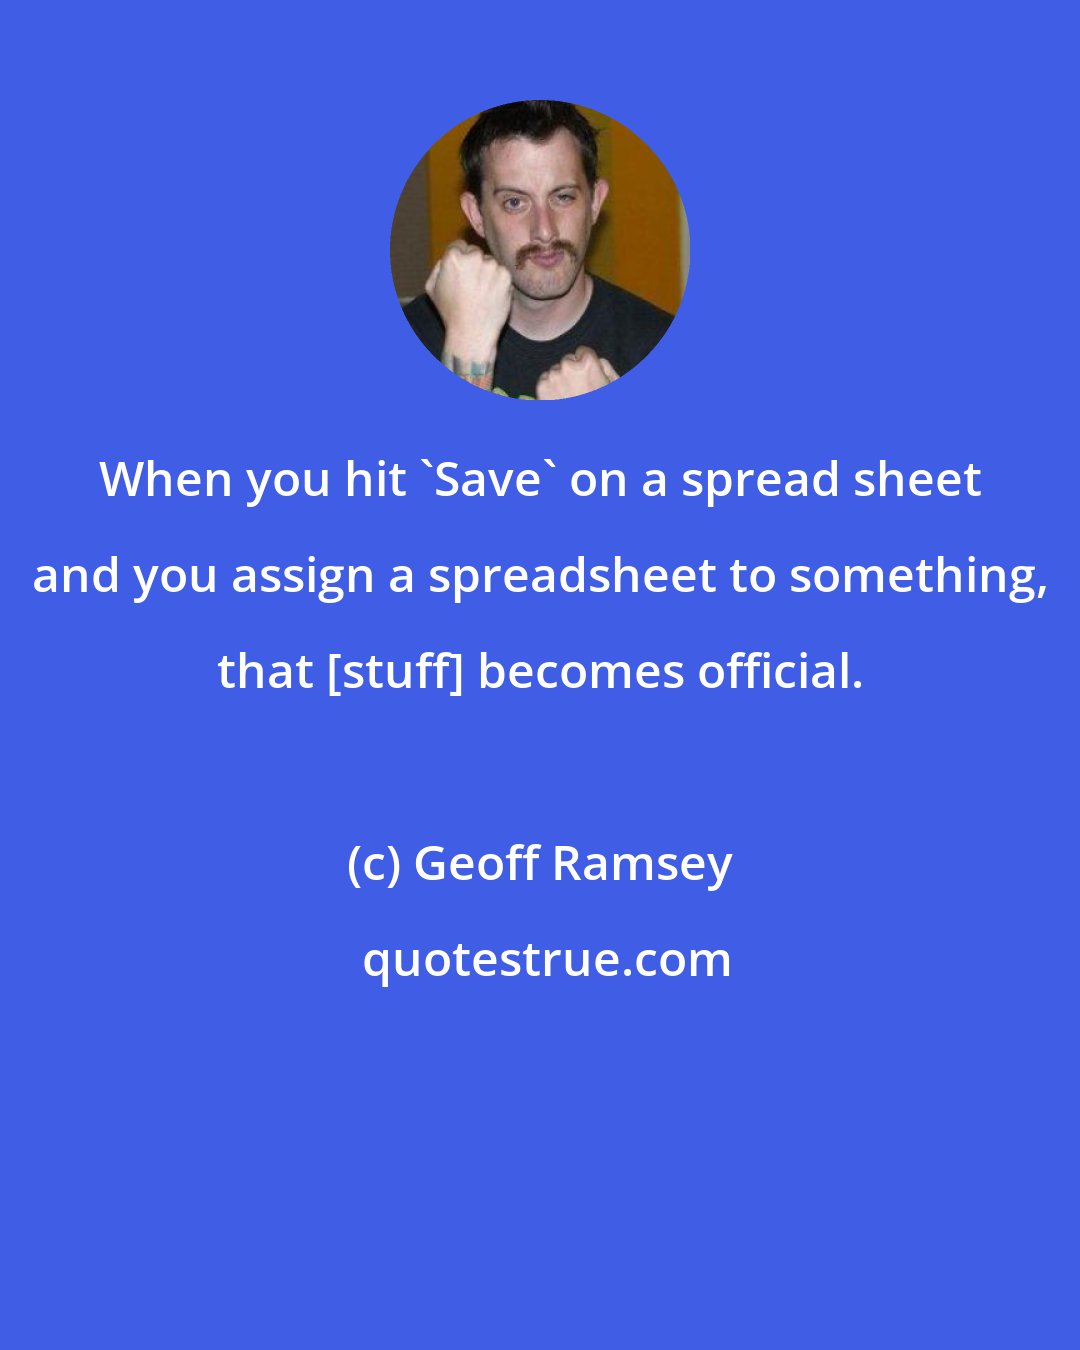 Geoff Ramsey: When you hit 'Save' on a spread sheet and you assign a spreadsheet to something, that [stuff] becomes official.